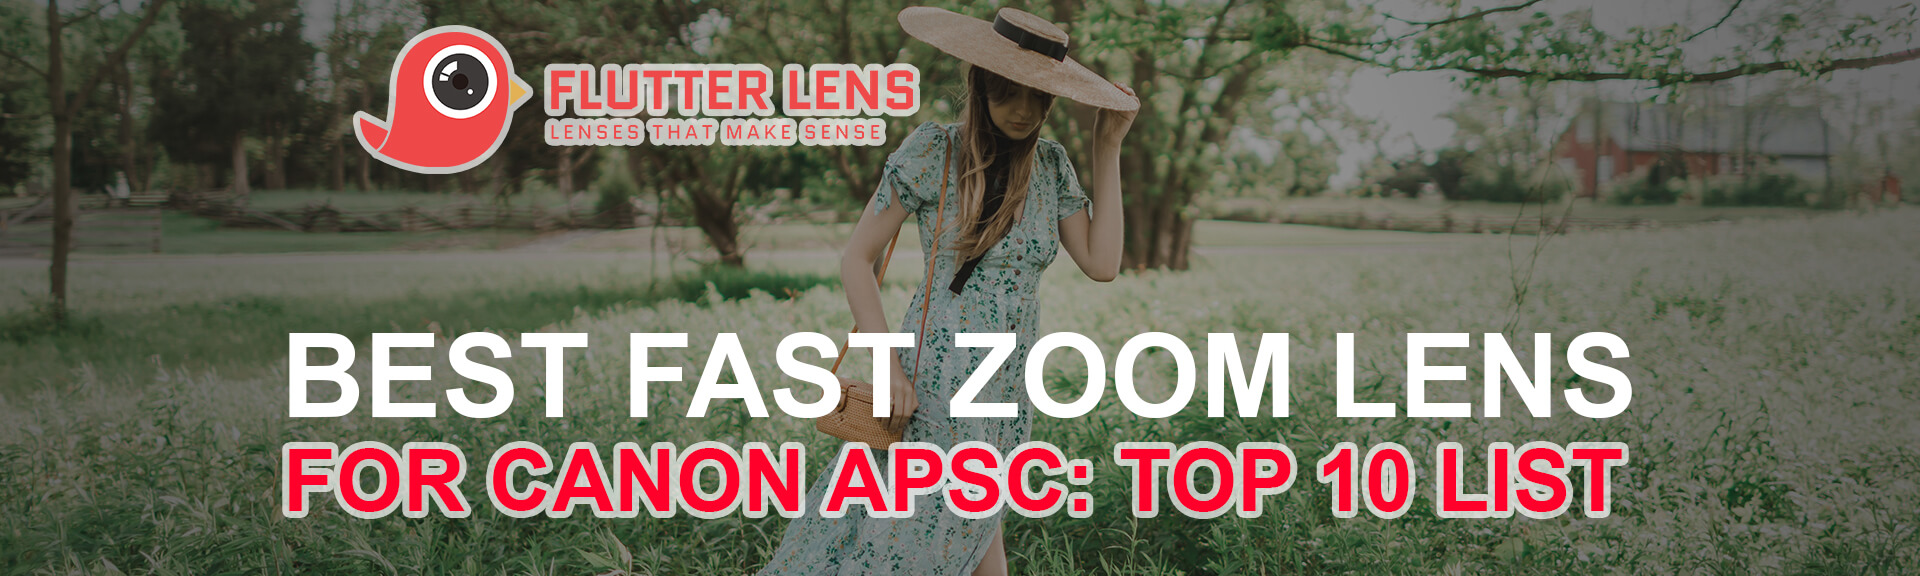 Best Fast Zoom Lens for Canon APSC